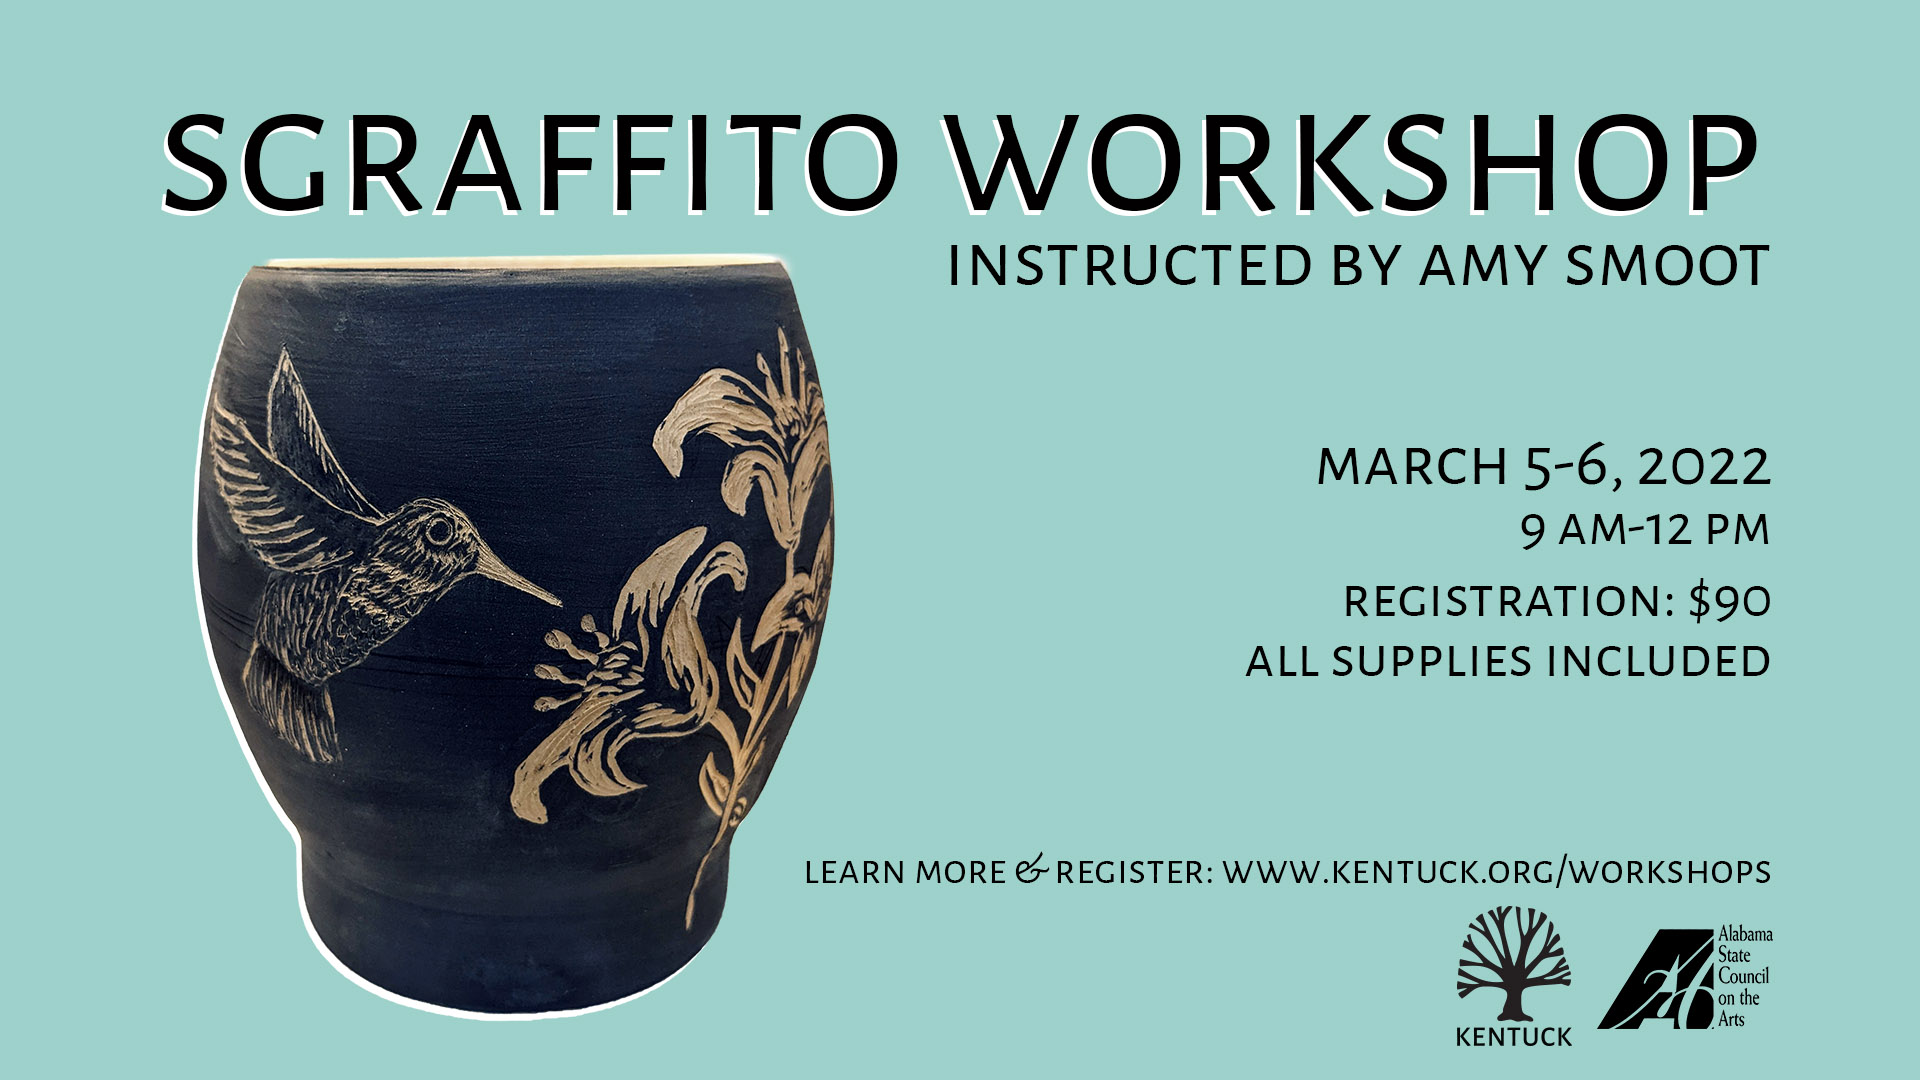 Sgraffito Workshop with Amy Smoot